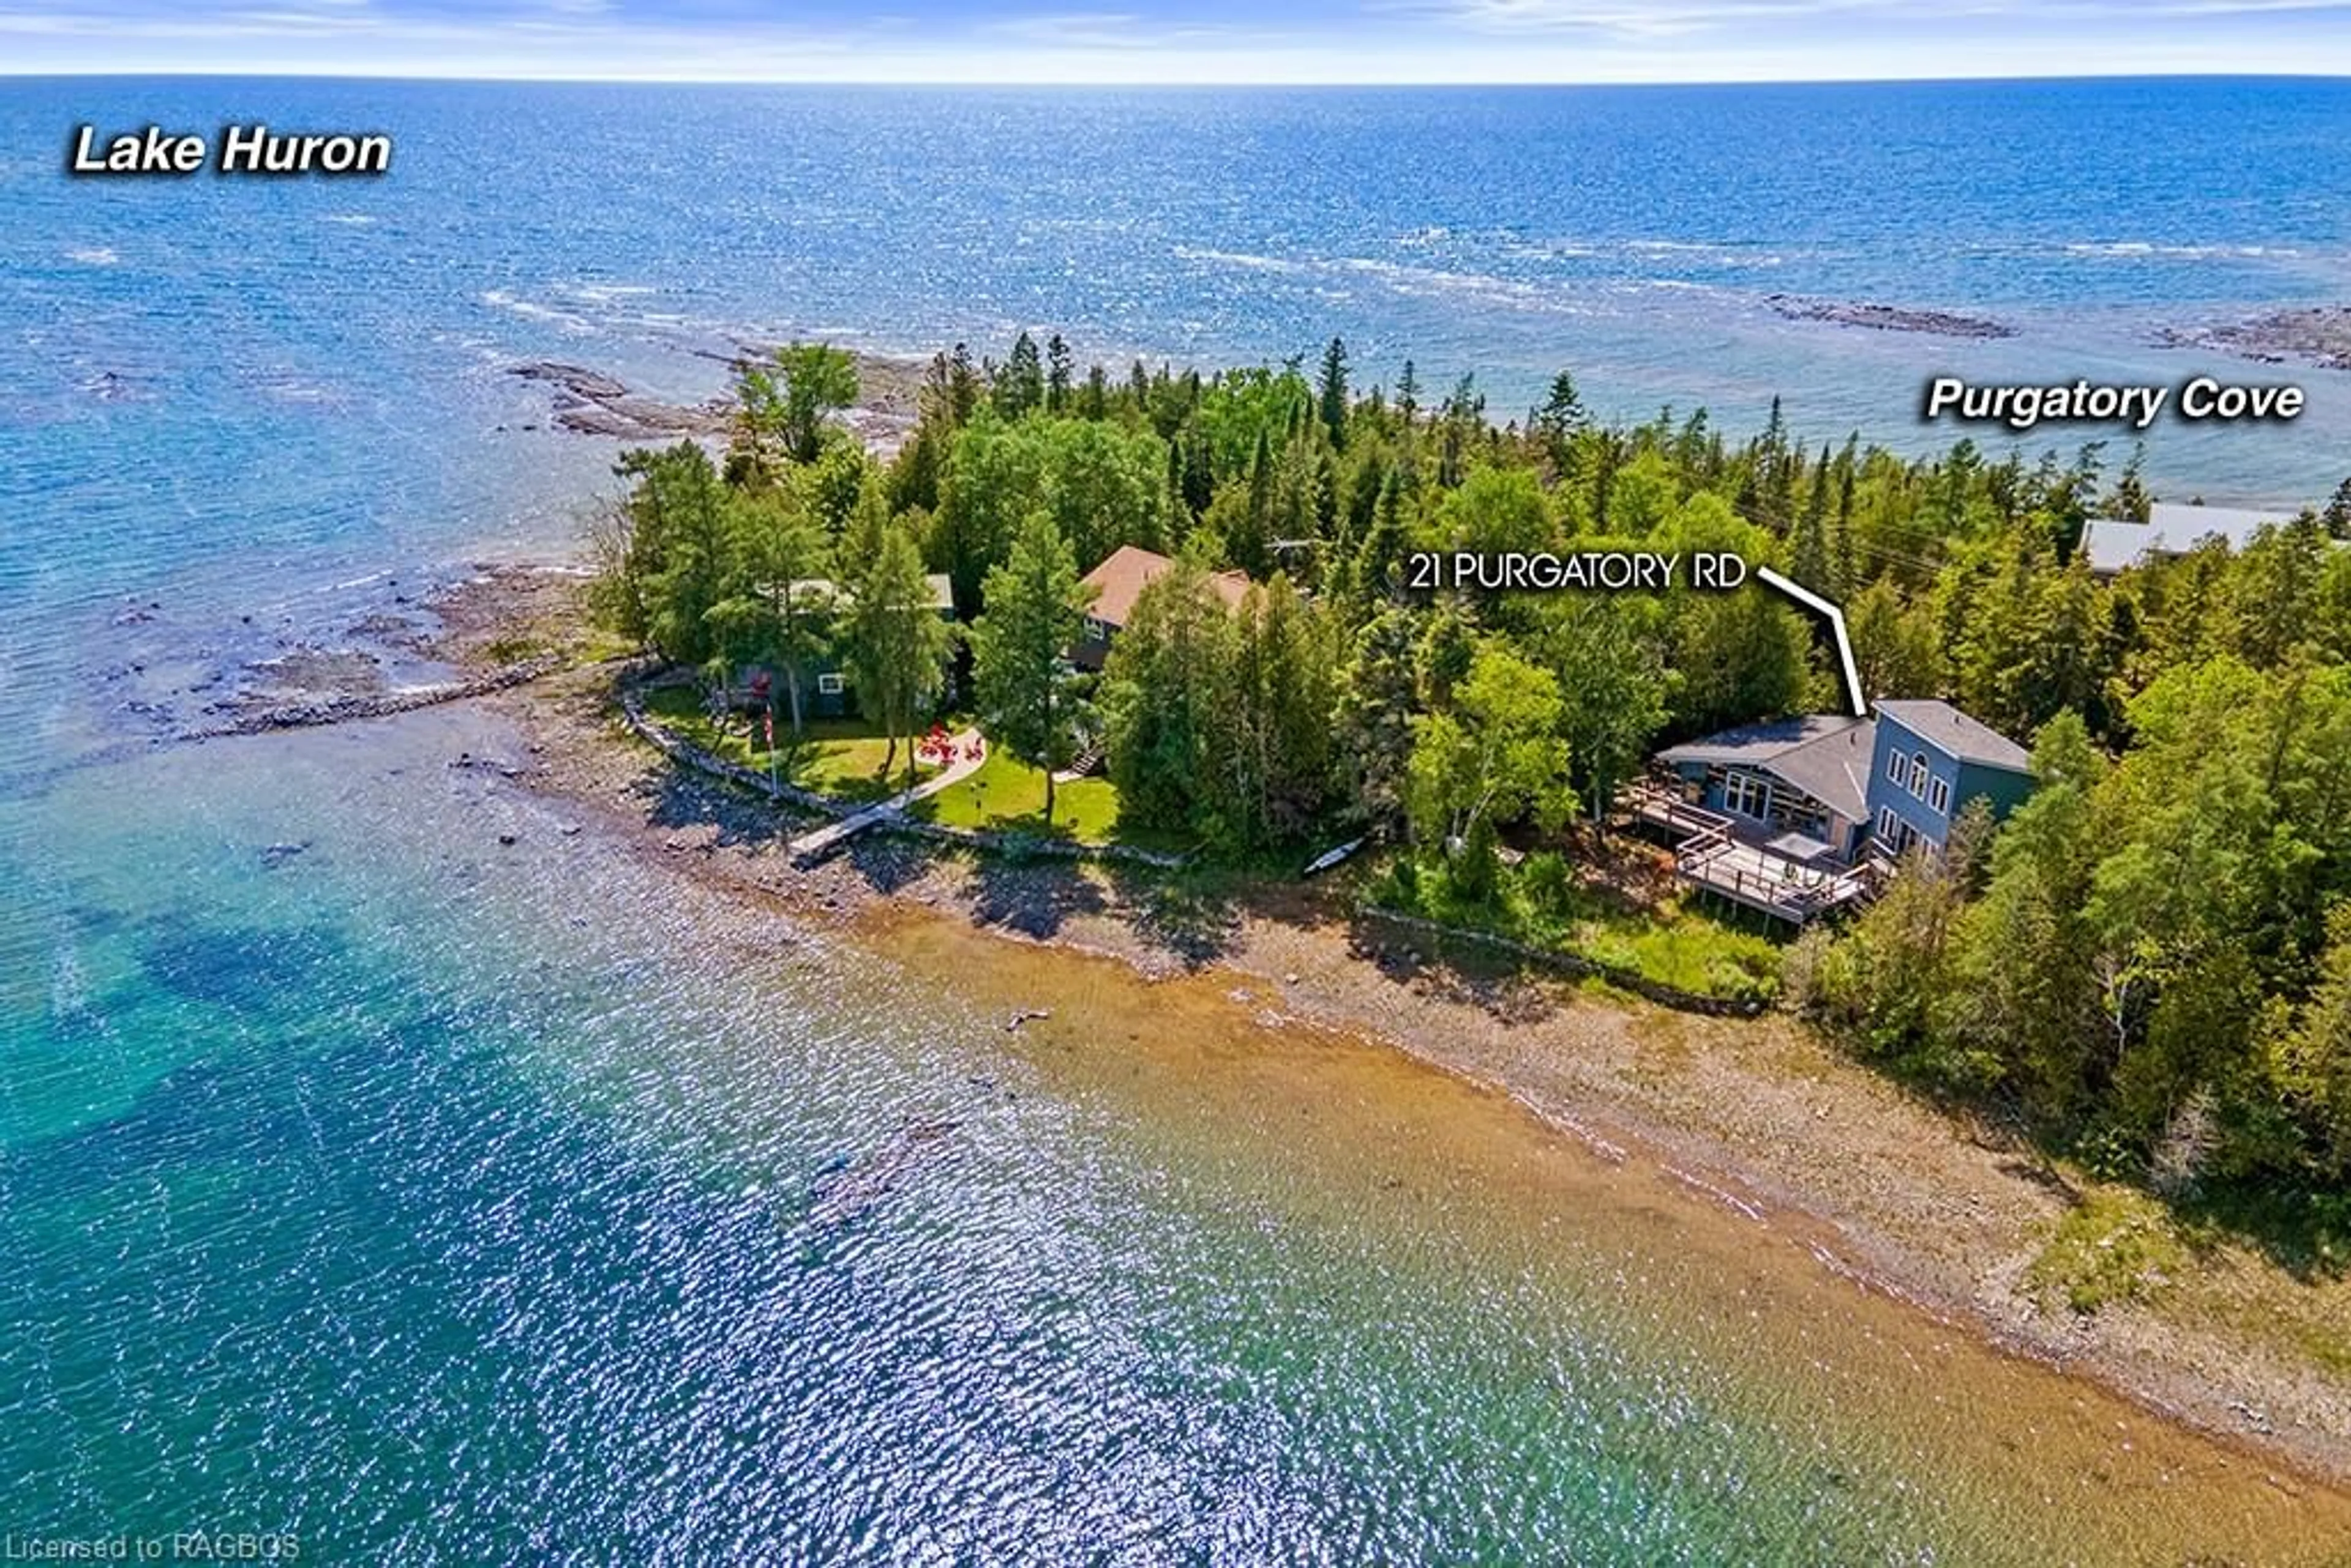 Cottage for 21 Purgatory Rd, Northern Bruce Peninsula Ontario N0H 2T0